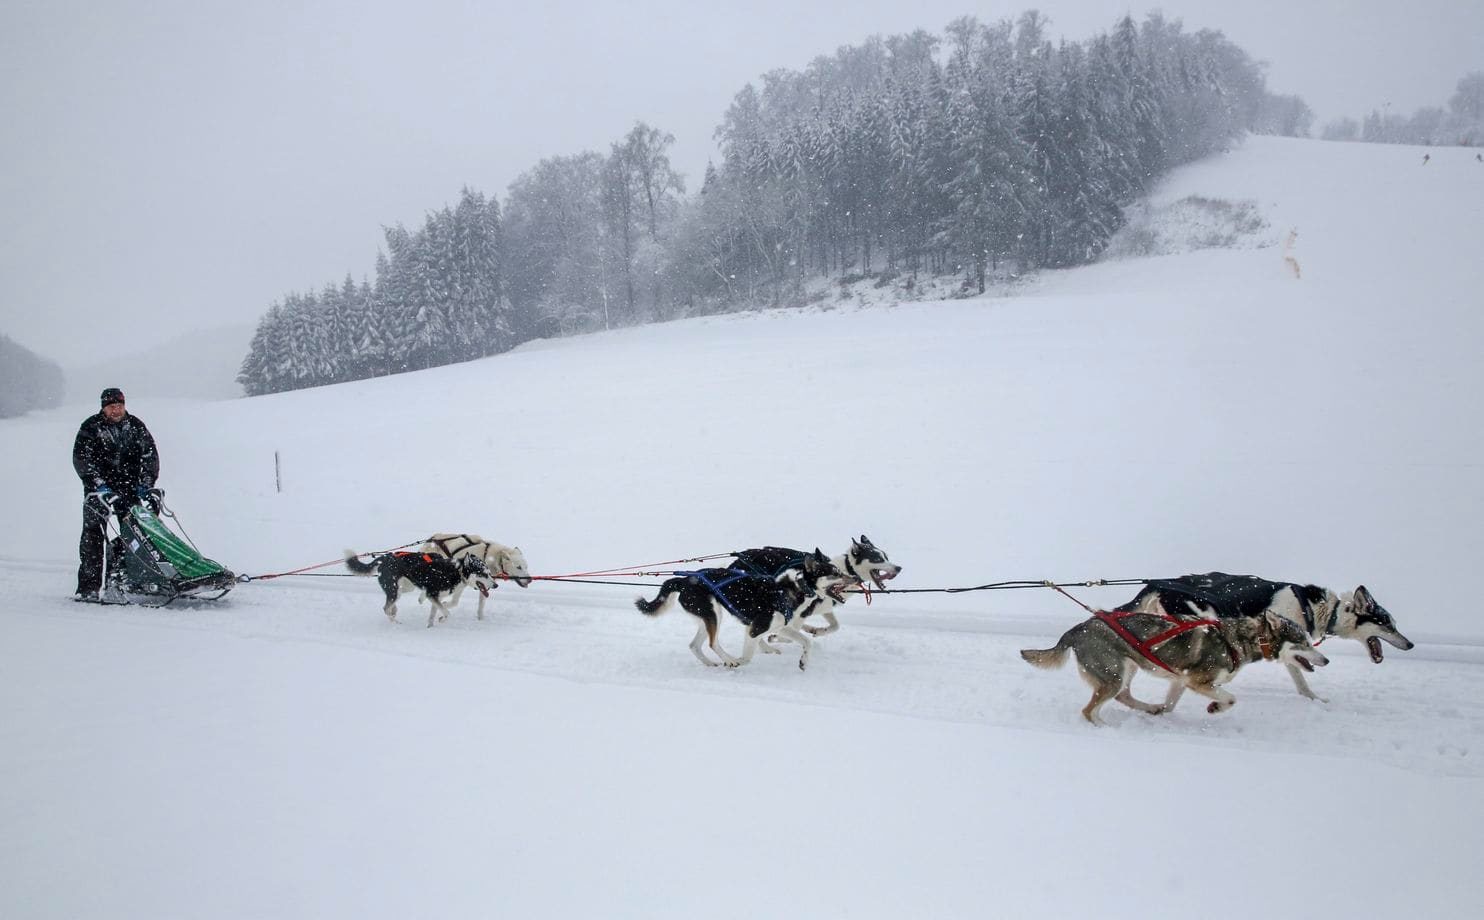 Musher Michael Ruopp is pulled by his huskies as he rides on a field near Lichtenstein, Germany, Sunday, Jan.6, 2019.